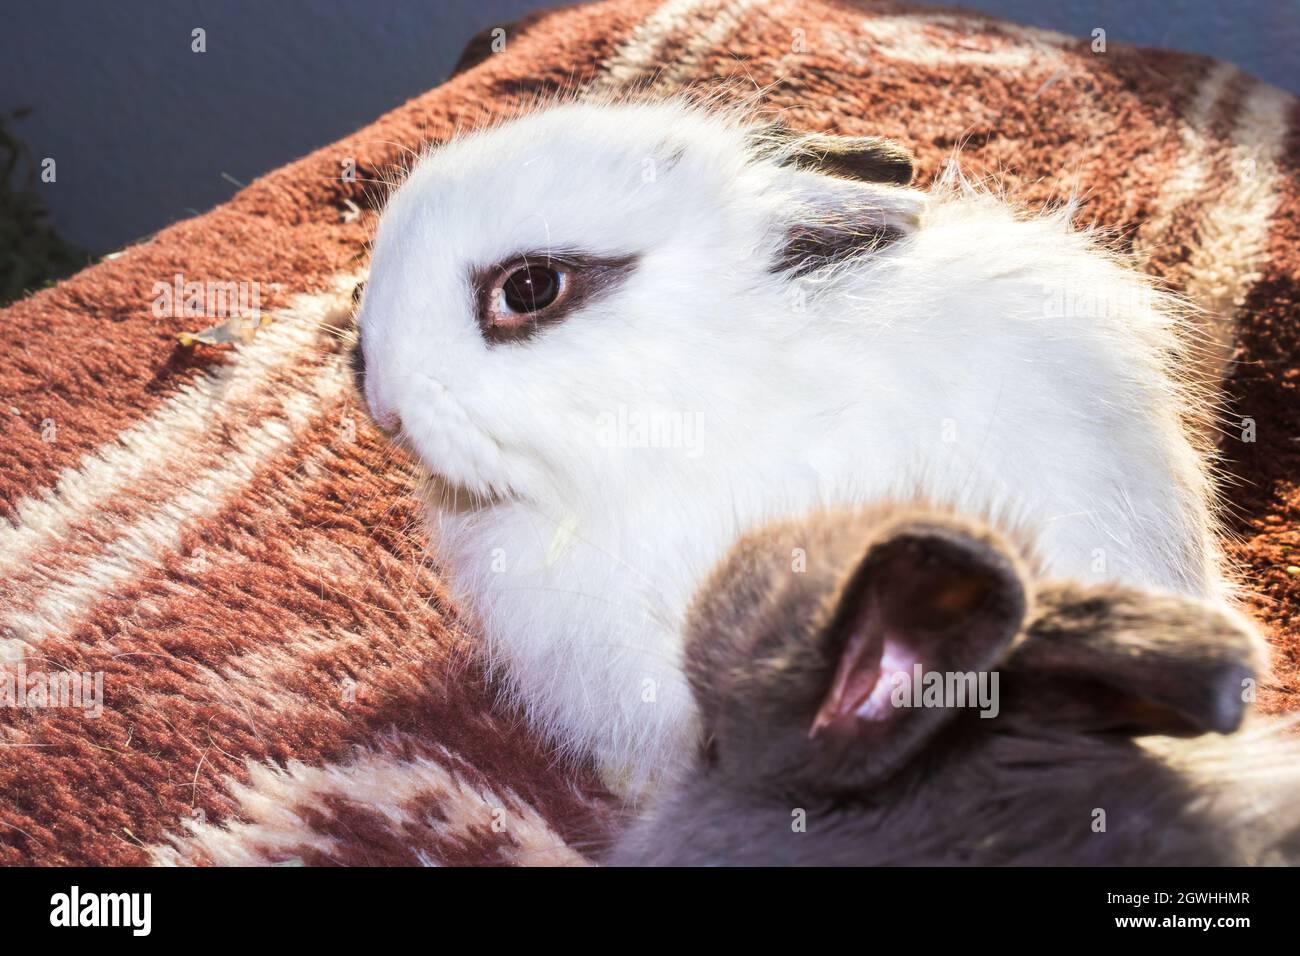 Domestic white baby Jersey Wooly rabbit eating and sleeping, Cape Town, South Africa Stock Photo